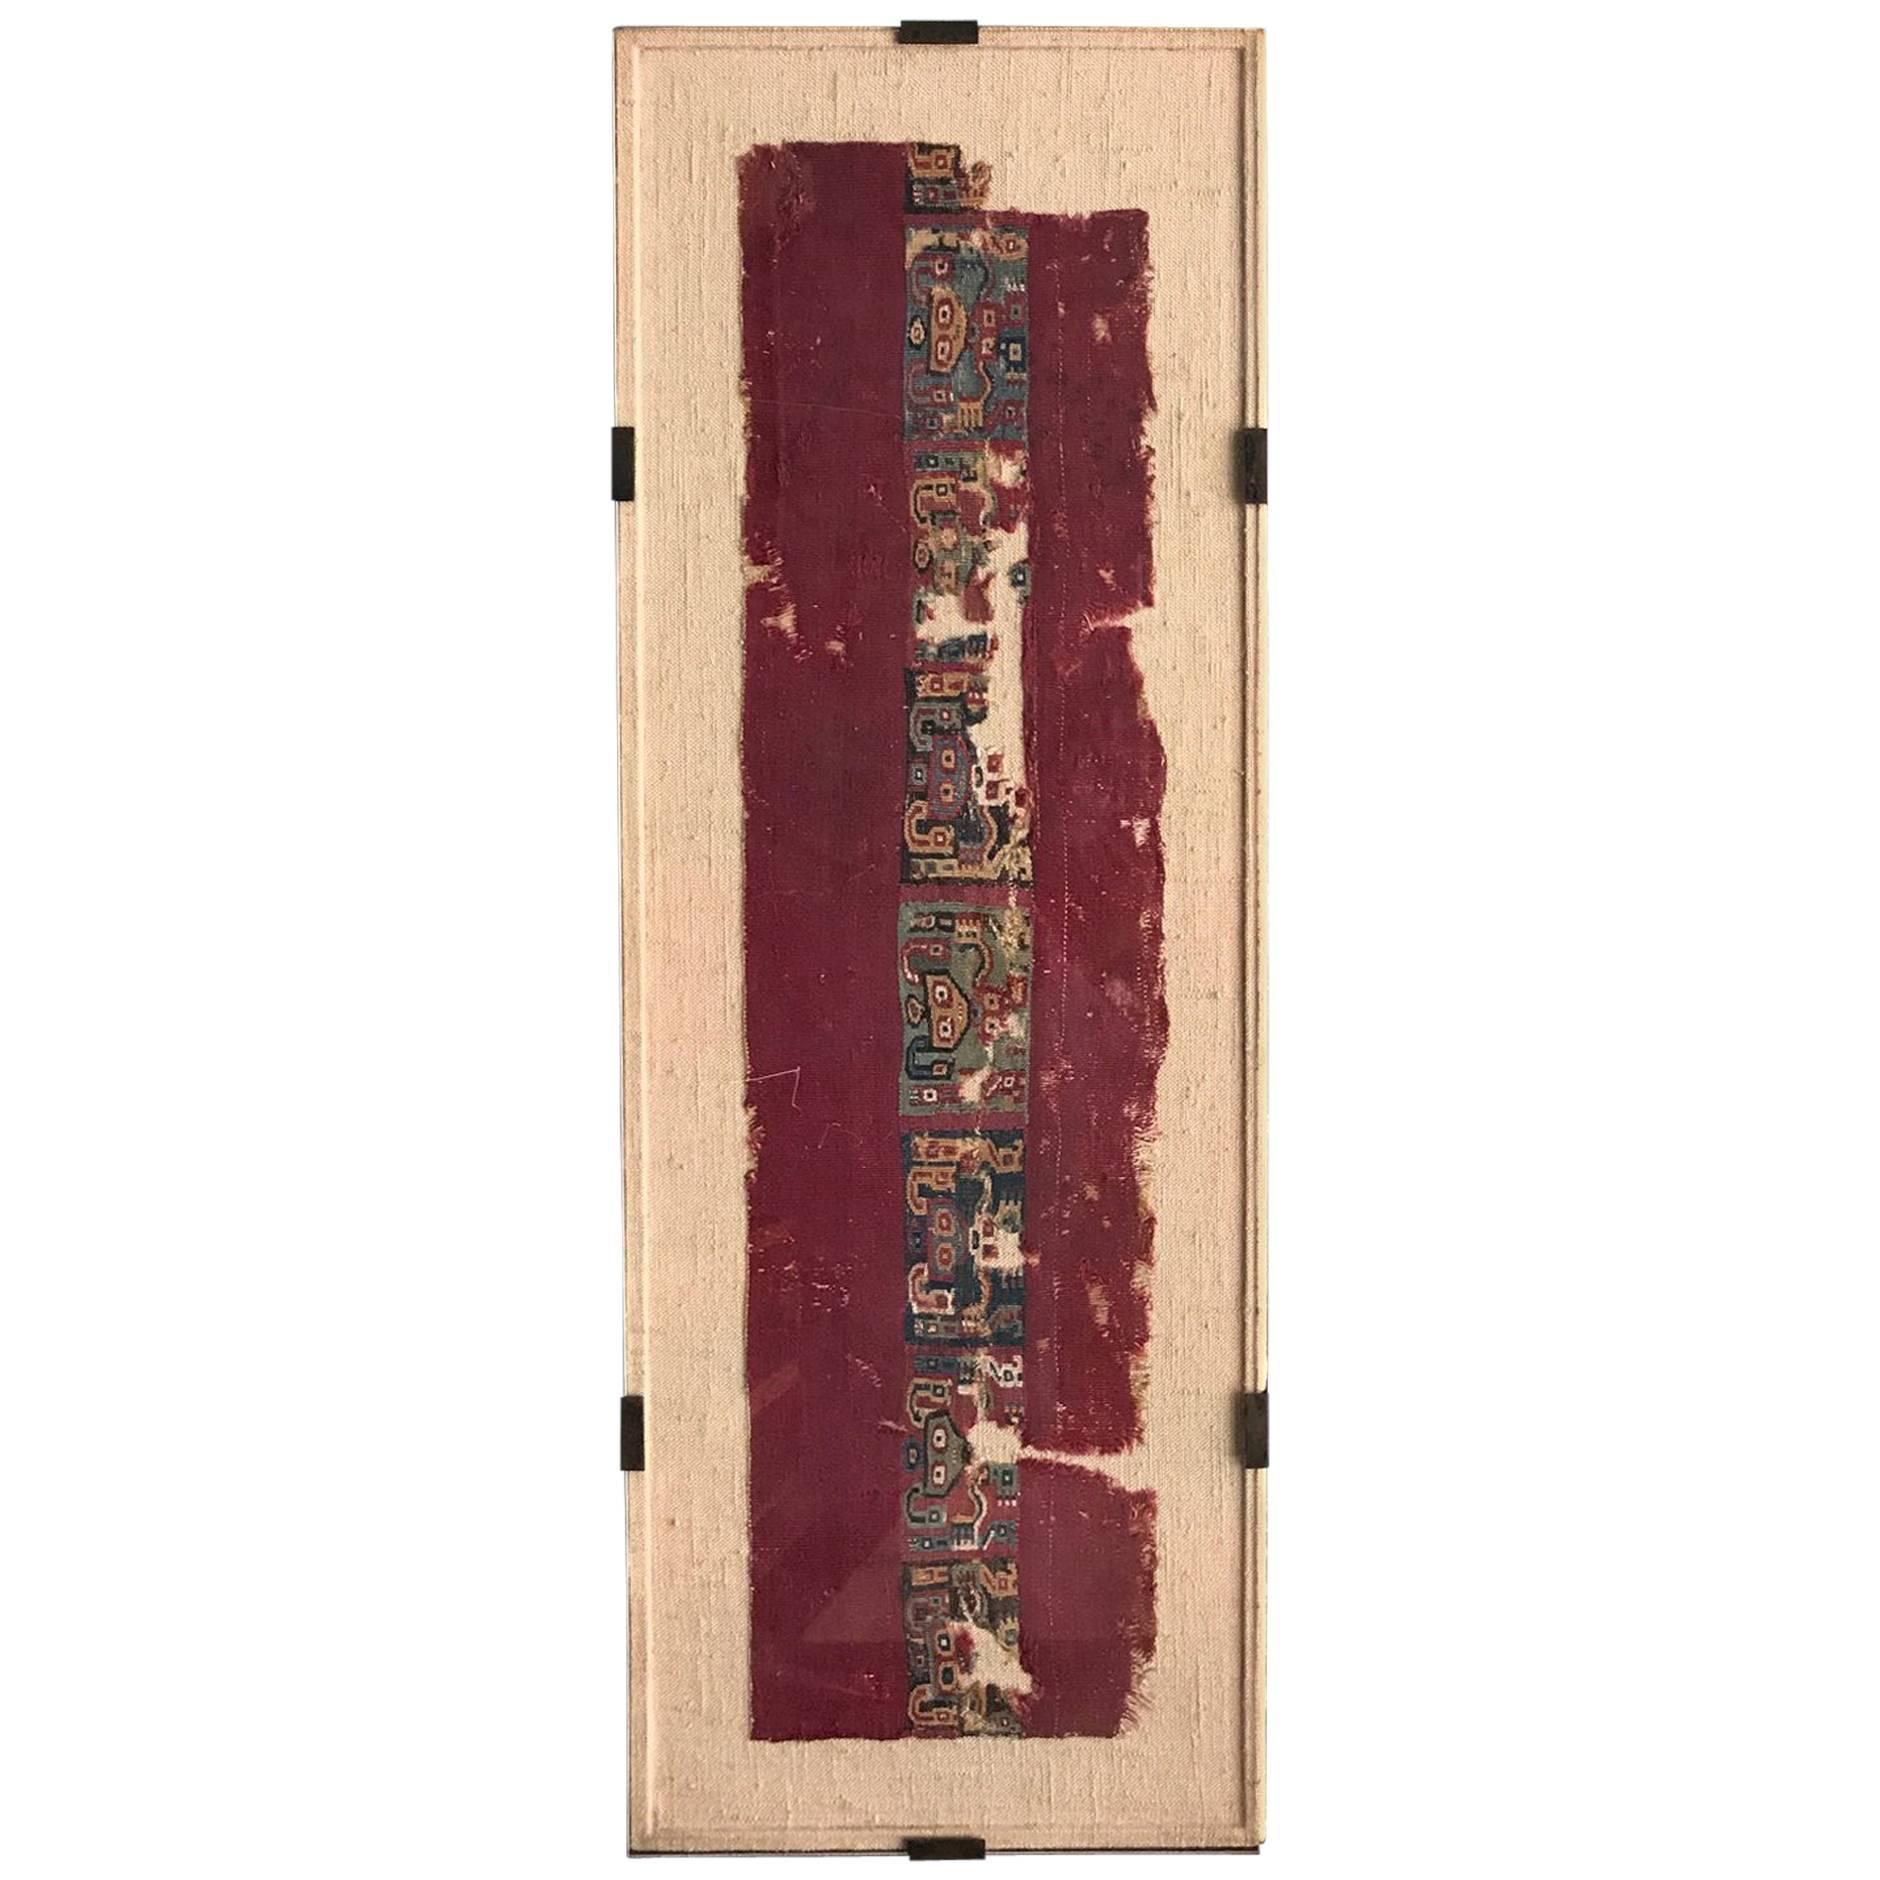 Framed Pre-Columbian Textile Fragment From Wari Culture